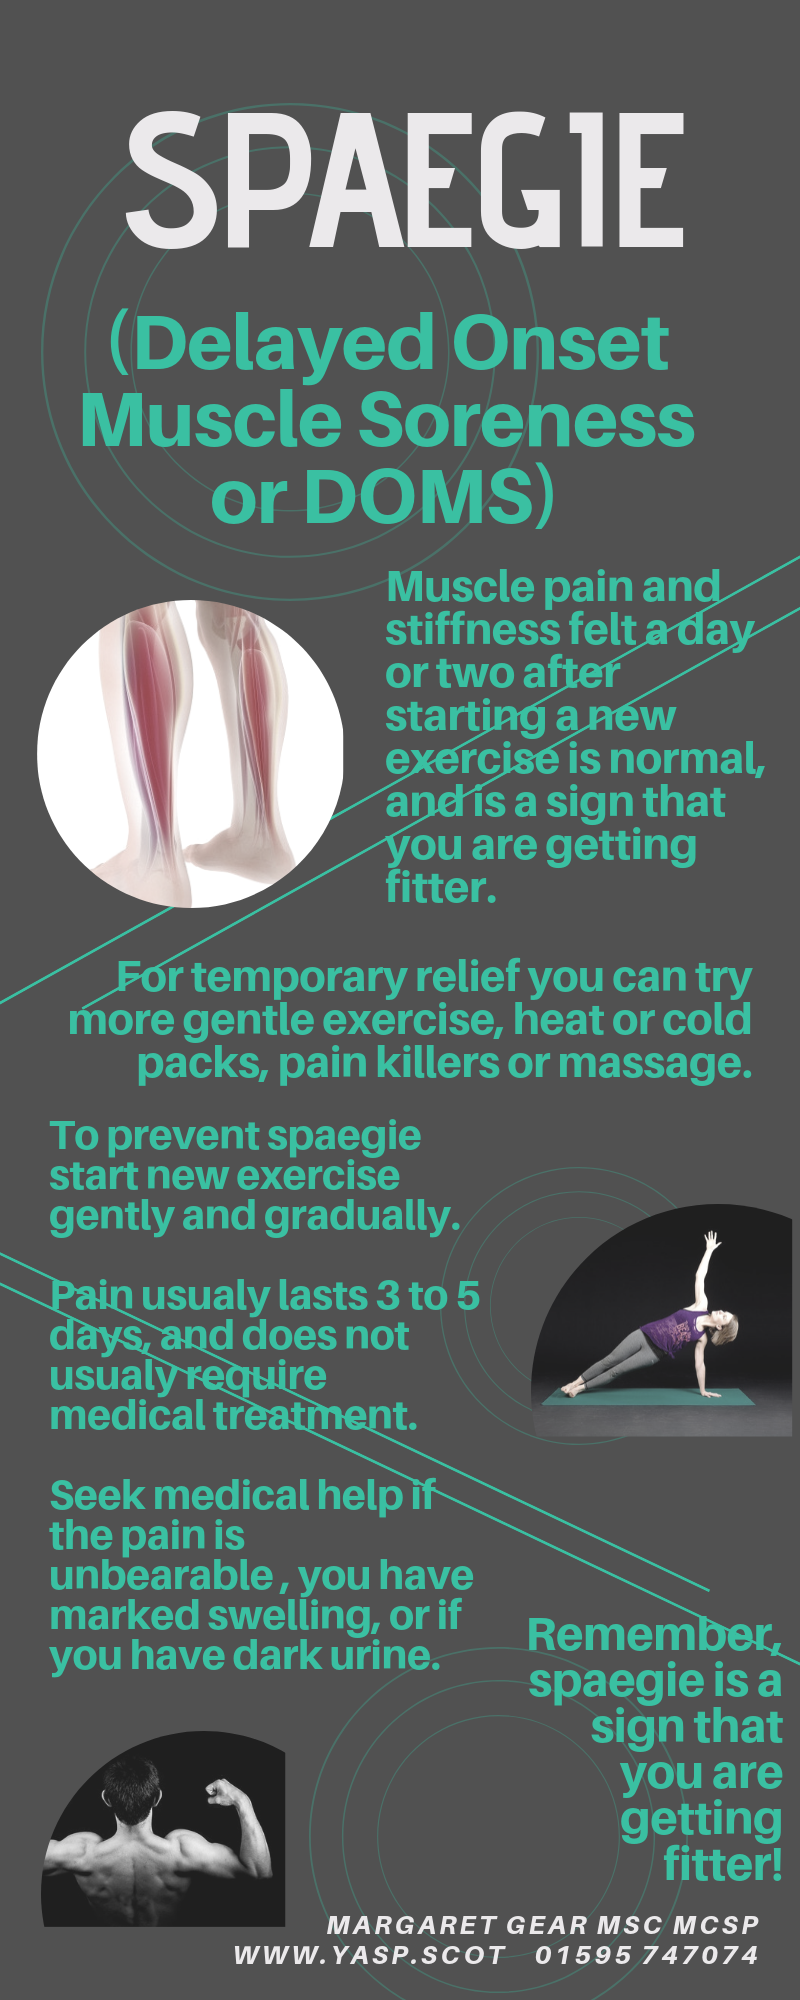 Spaegie infographic - Delayed Onset Muscle Soreness DOMS.